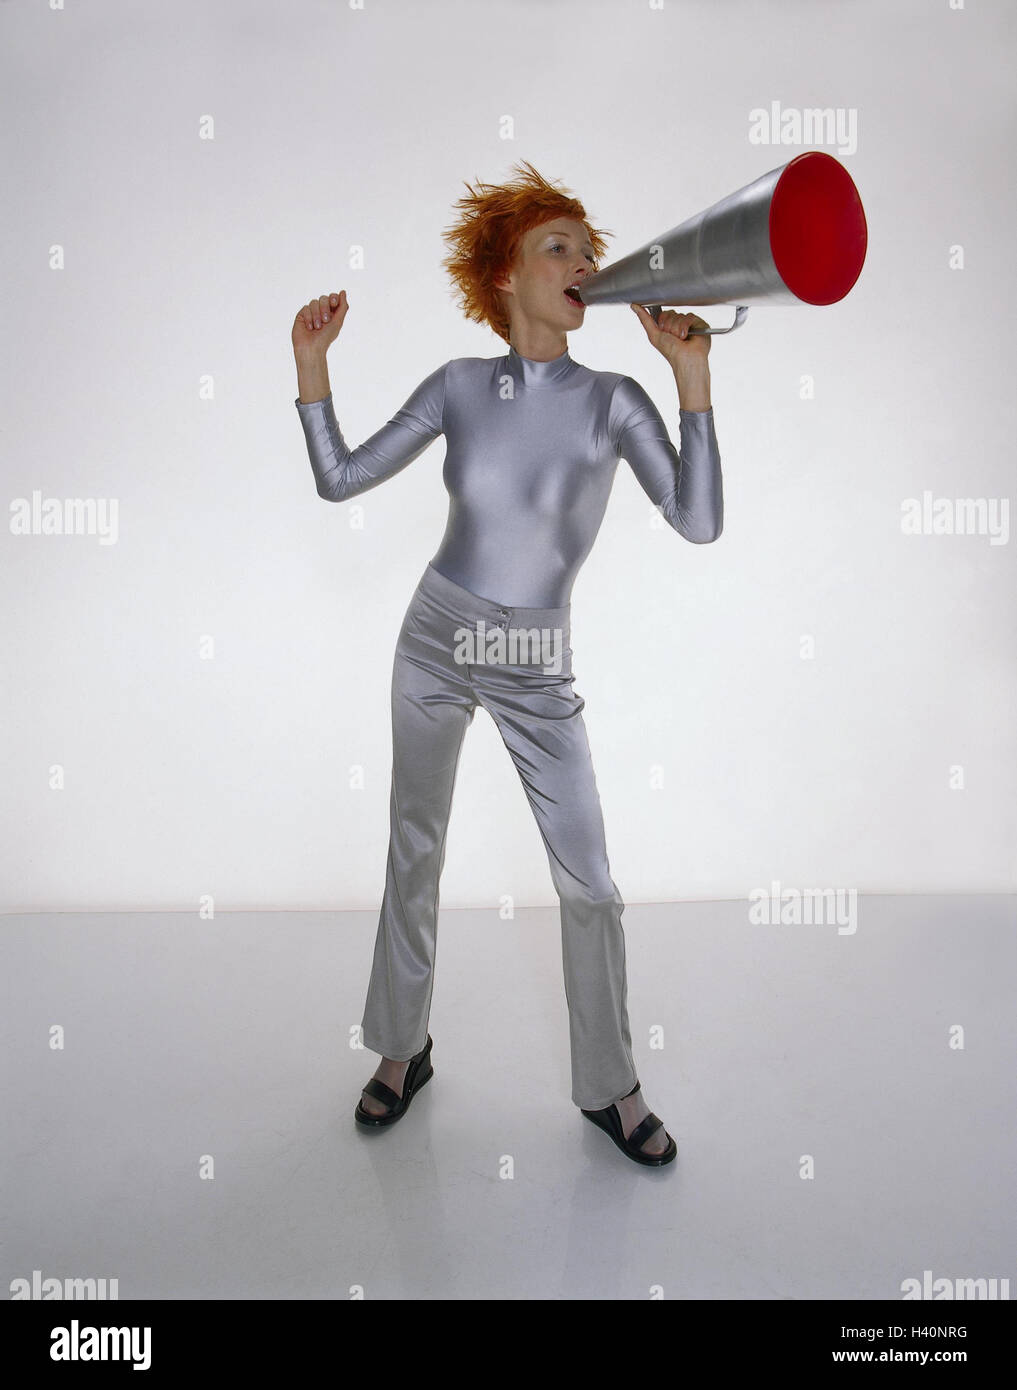 Woman, young, hairs, red, clothes, silver, megaphone, 'shout', gesture, Future, futuristic, studio, hair, hairstyle, briefly, stand off, exclaim megaphone, megaphone, sound funnel, megaphone, announce, announce, shout, communication, information, news, cy Stock Photo